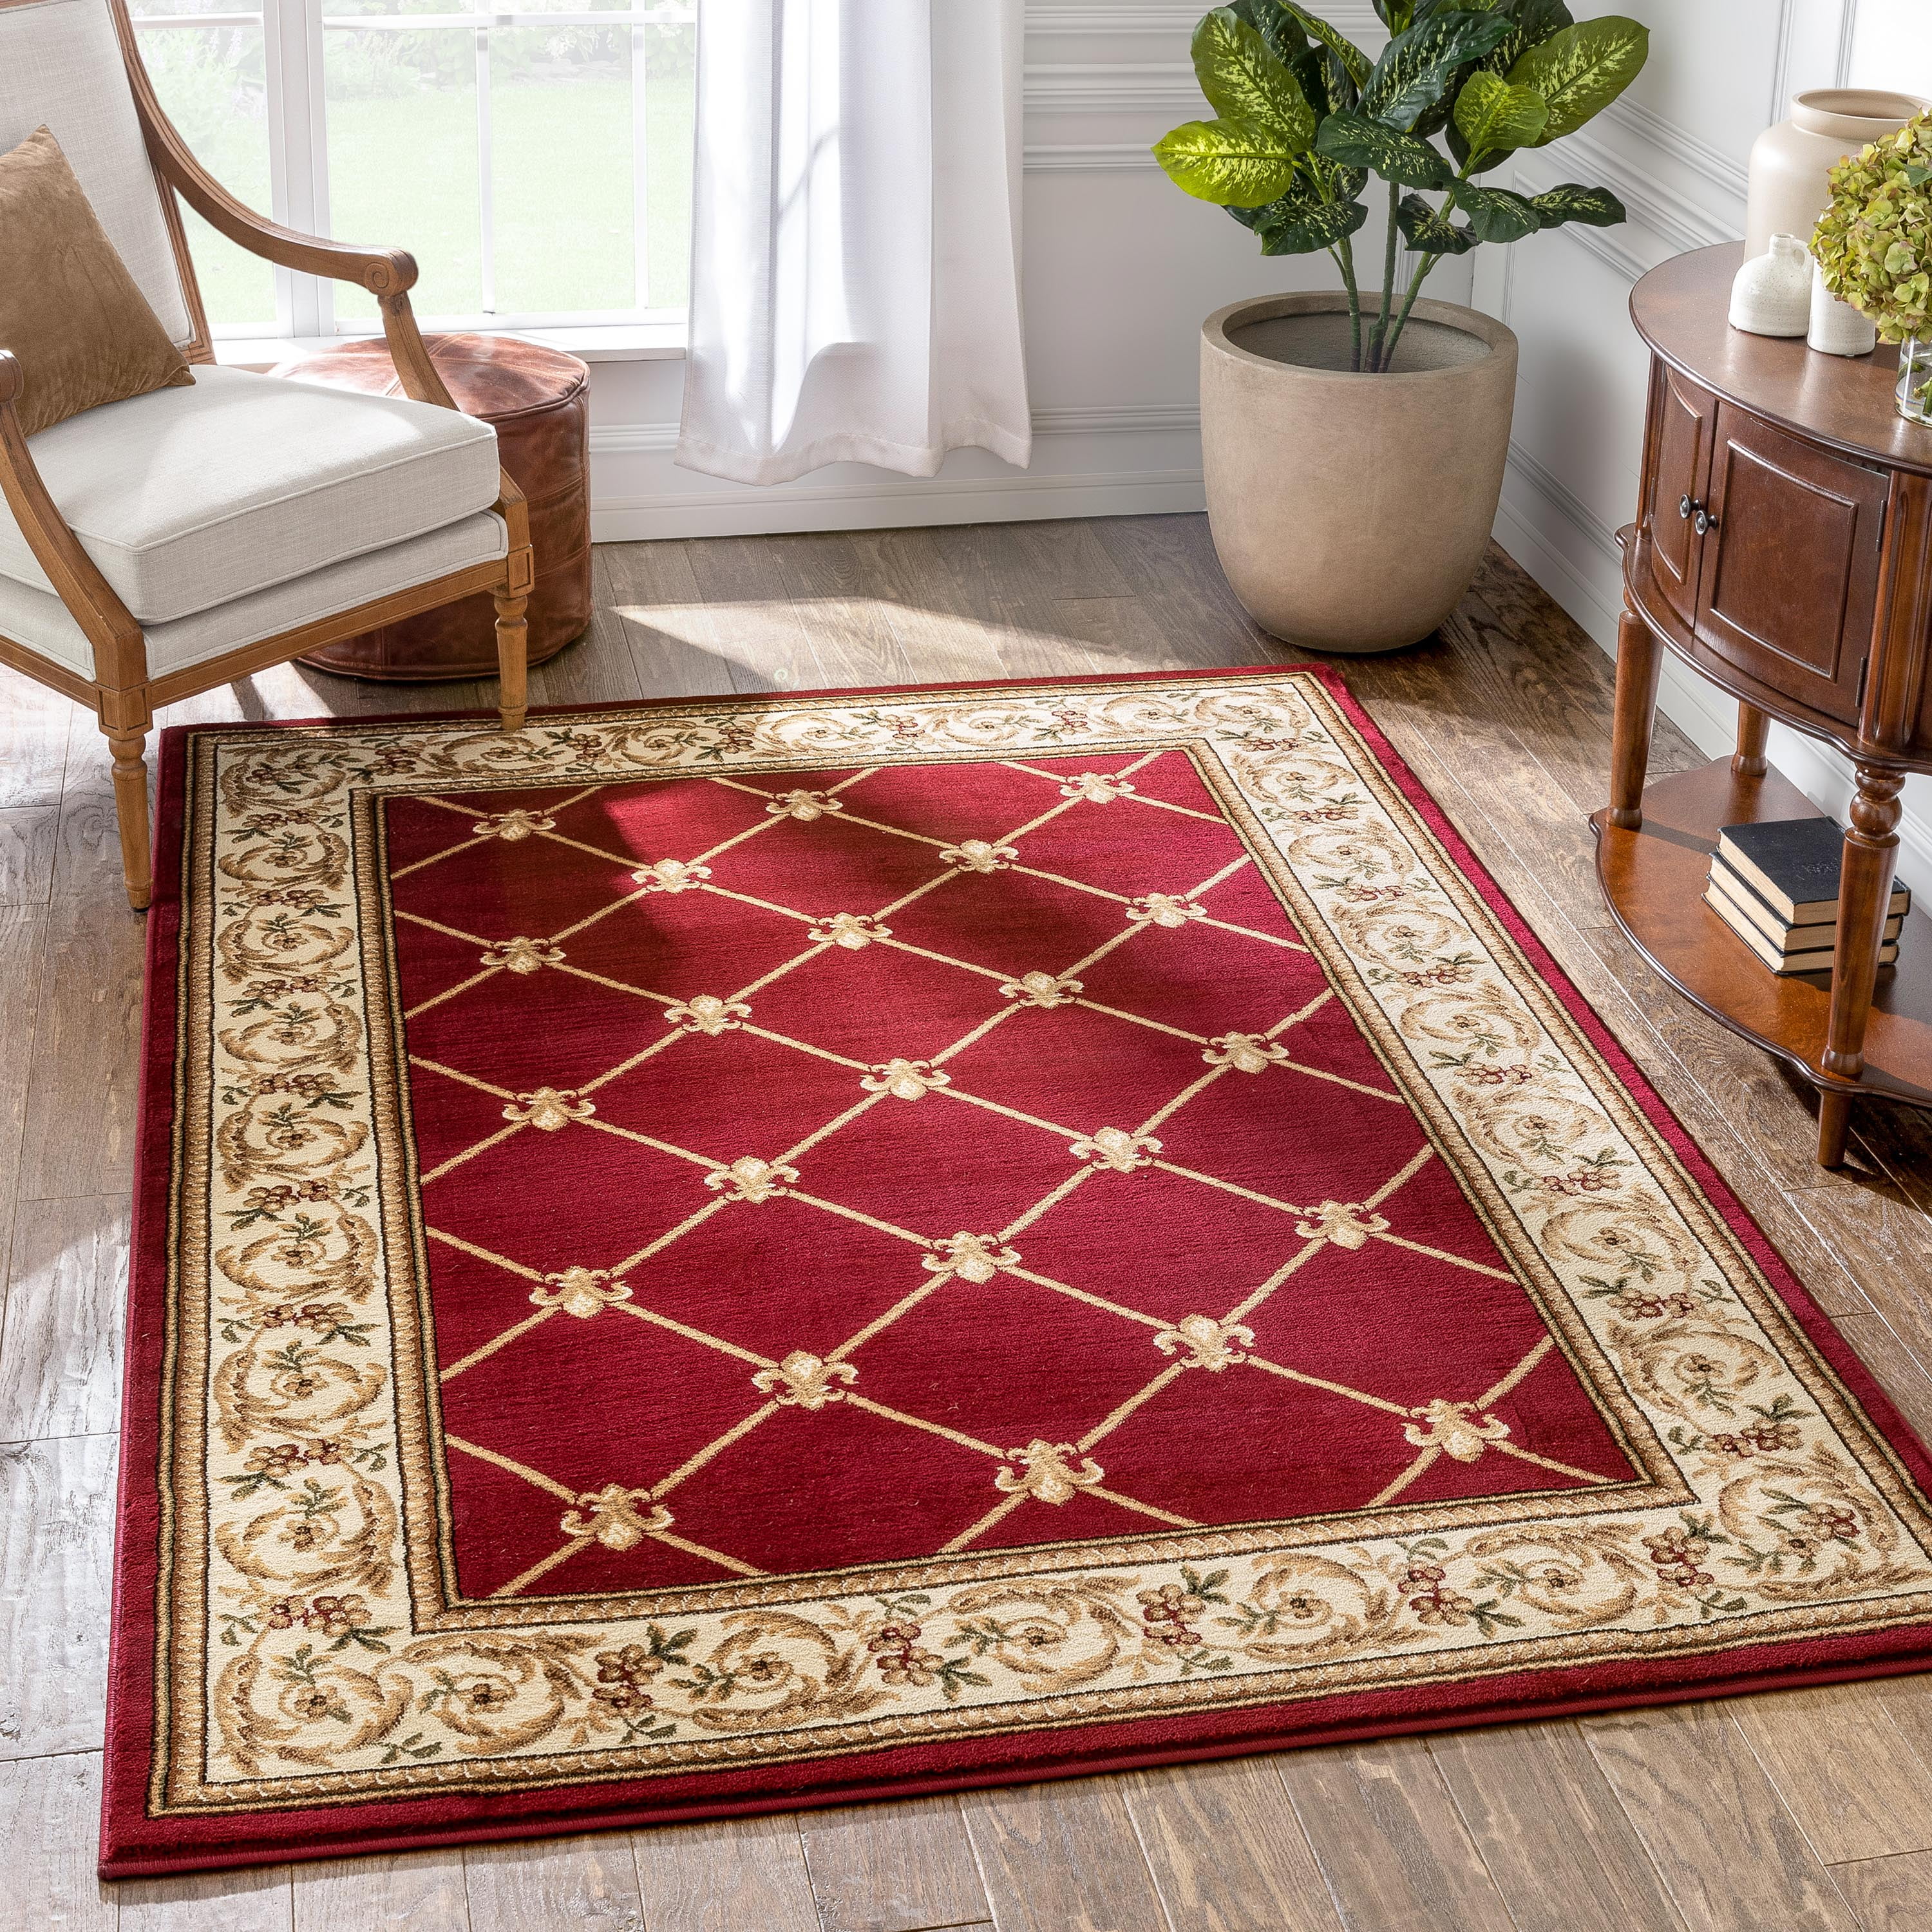 8X10 Area Rug New Border Floral Large Beige Black Red Traditional 